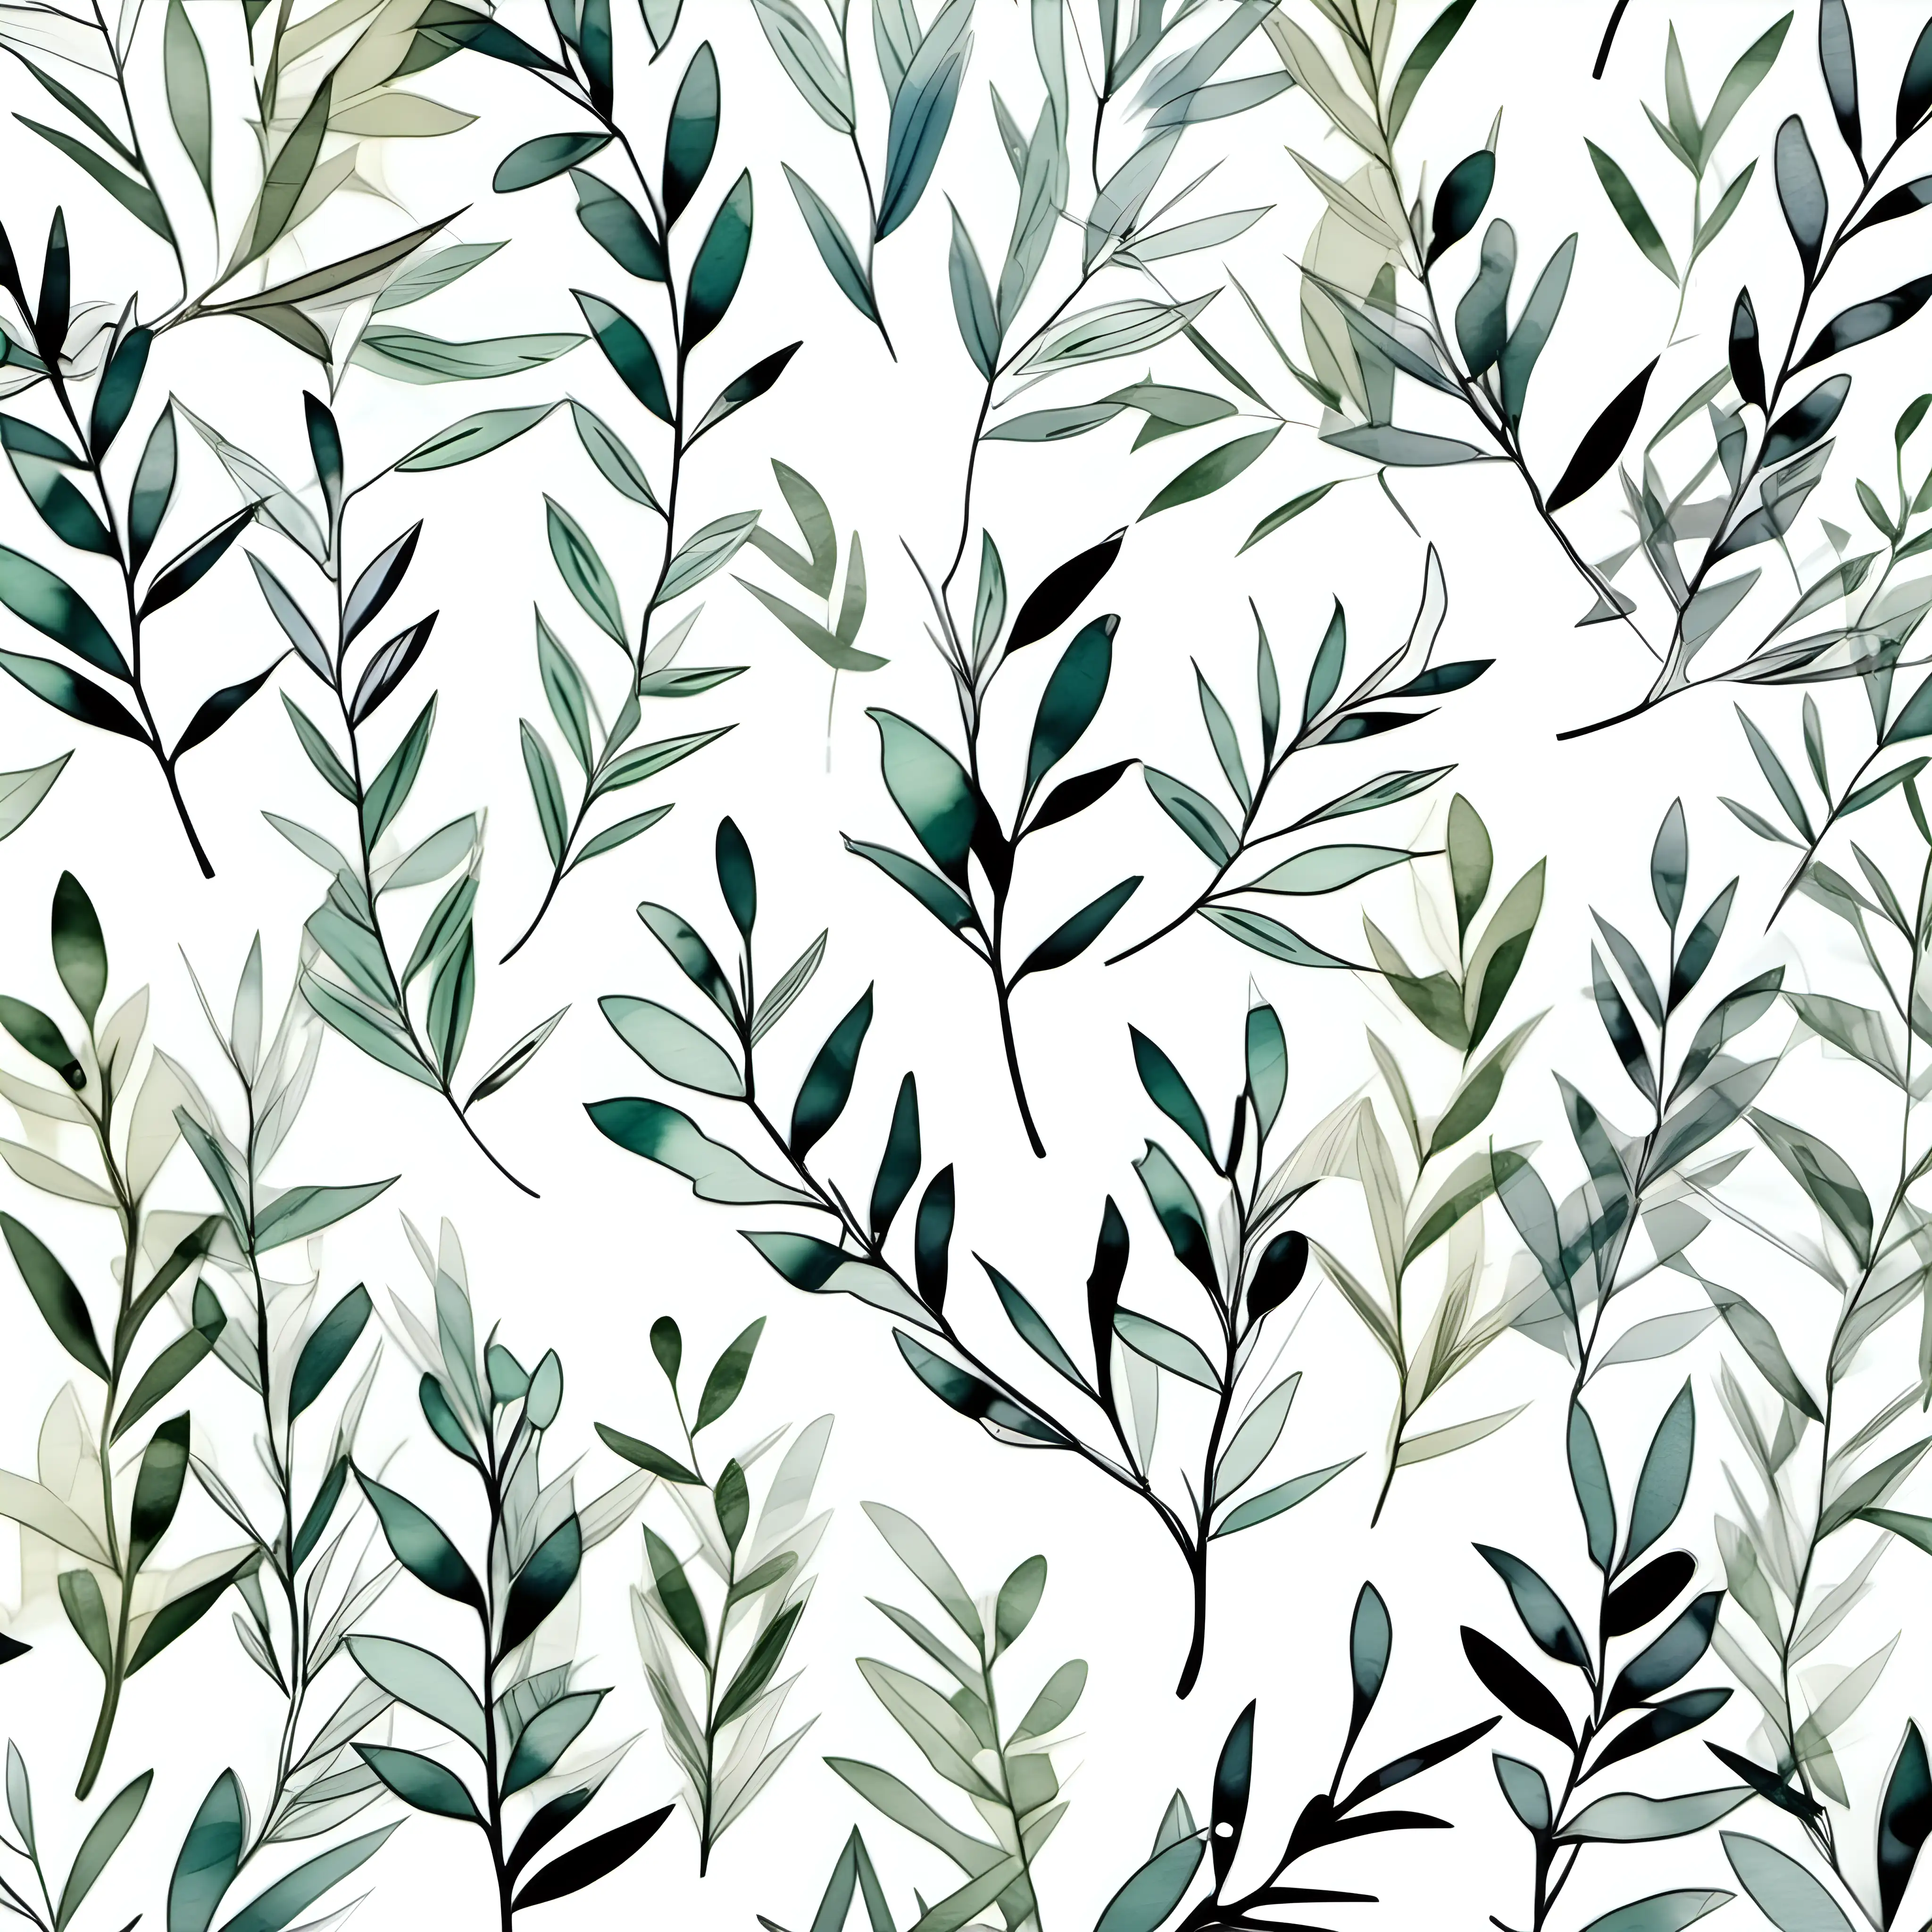 Pastel Watercolor Olive Plant Branches Clipart on White Background Andy Warhol Inspired Tile